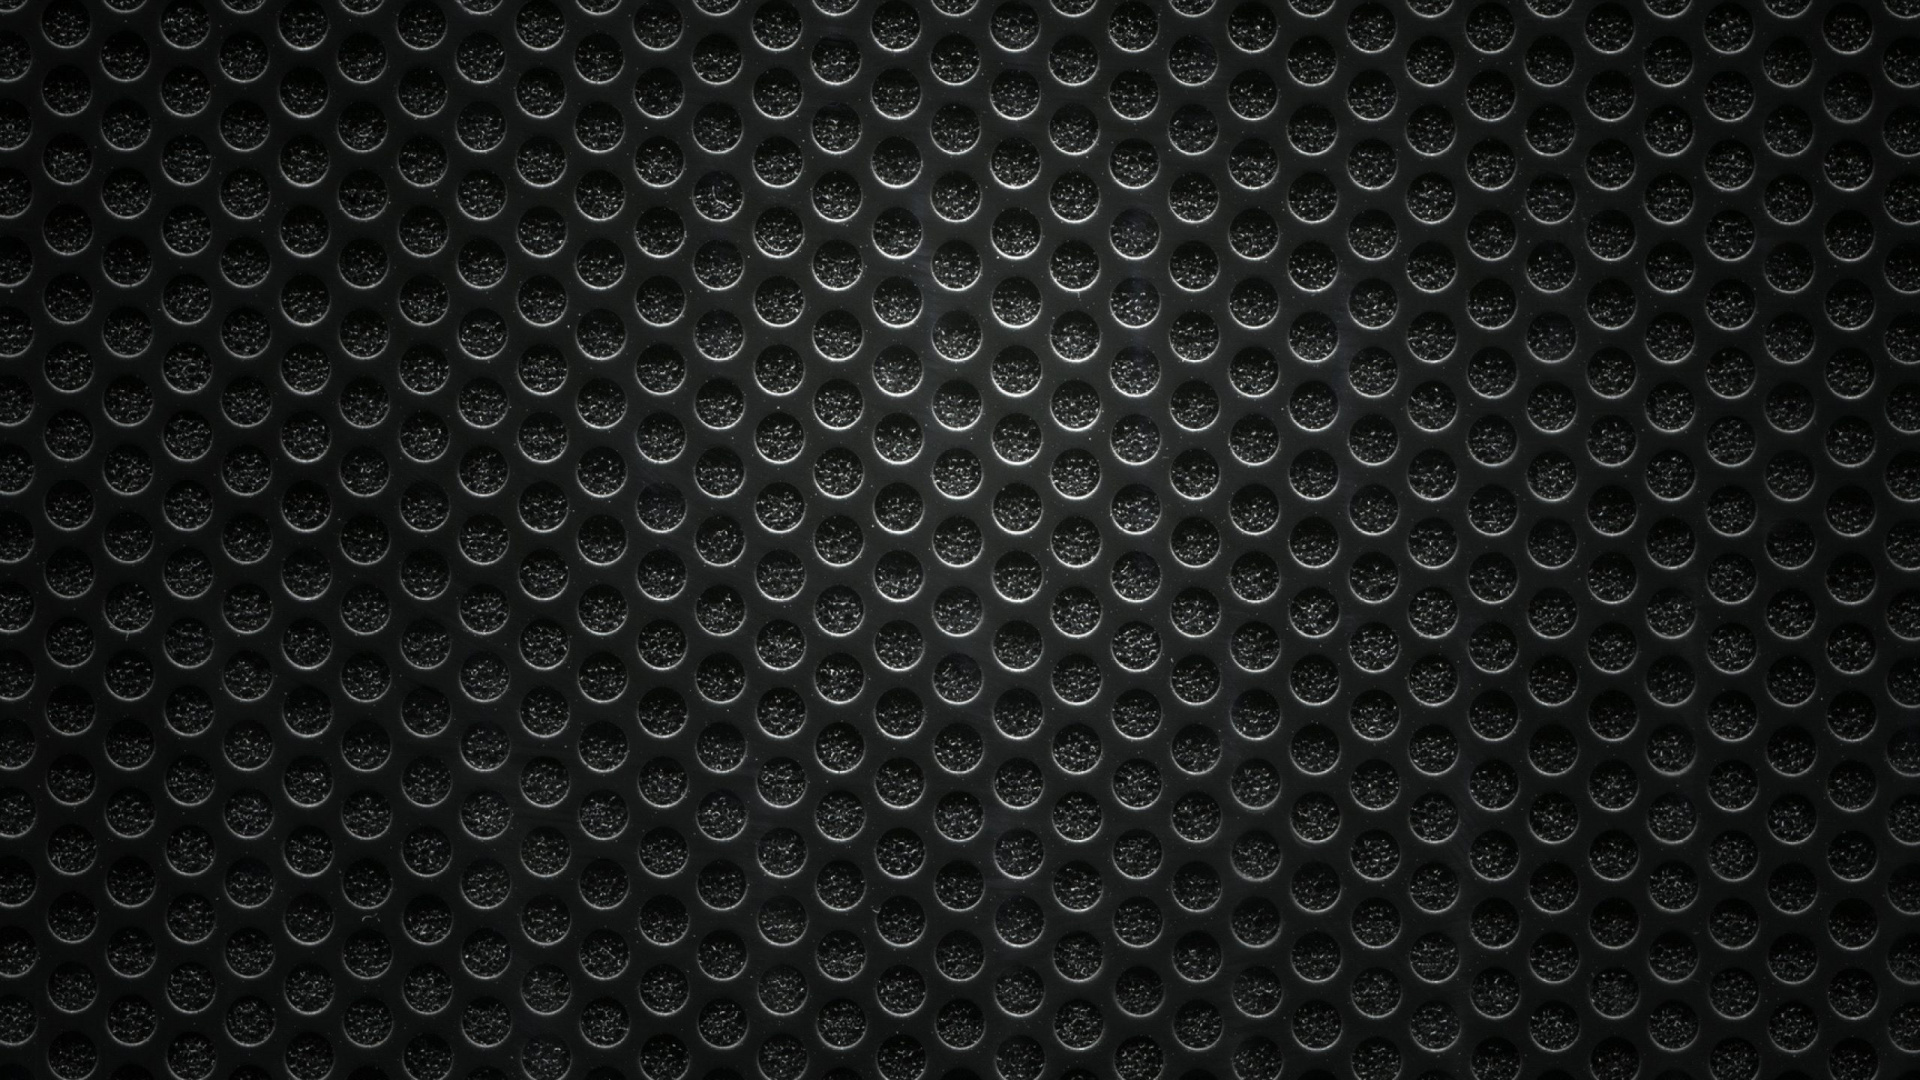 Black and White Polka Dot Textile. Wallpaper in 1920x1080 Resolution